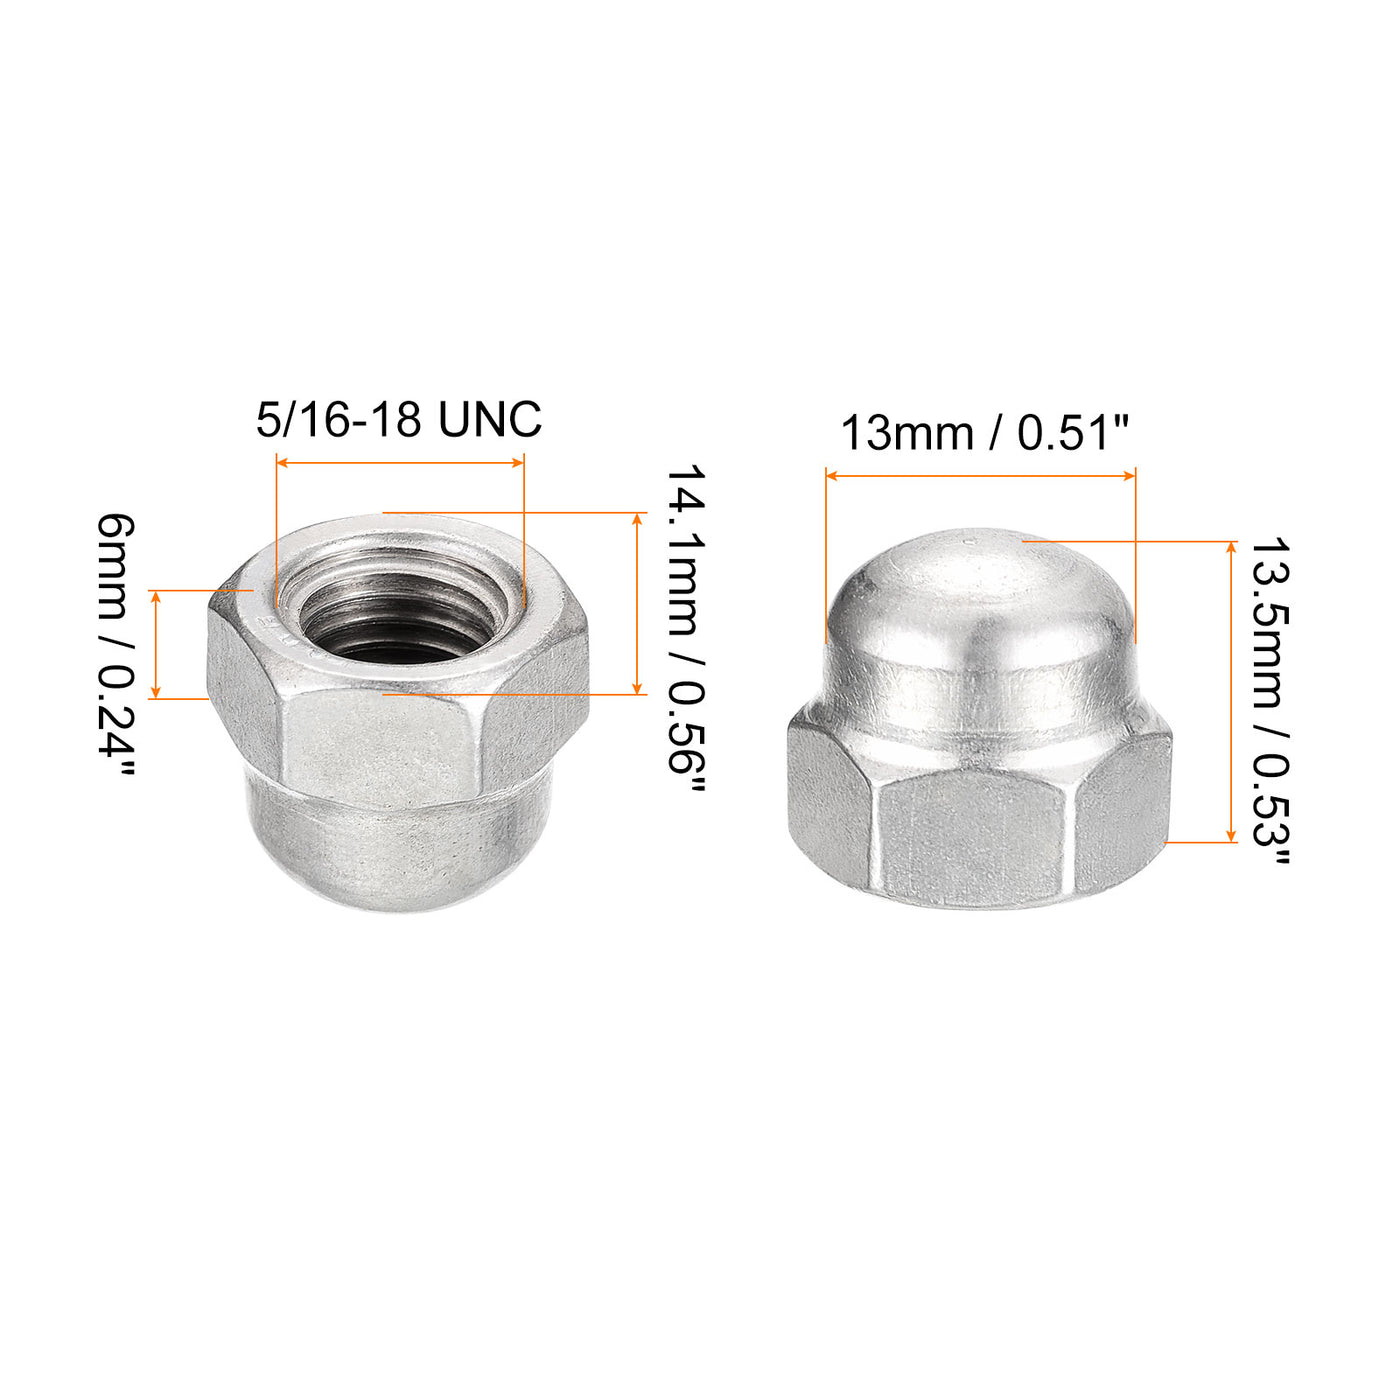 uxcell Uxcell 5/16-18 Acorn Cap Nuts,50pcs - 304 Stainless Steel Hardware Nuts, Acorn Hex Cap Dome Head Nuts for Fasteners (Silver)